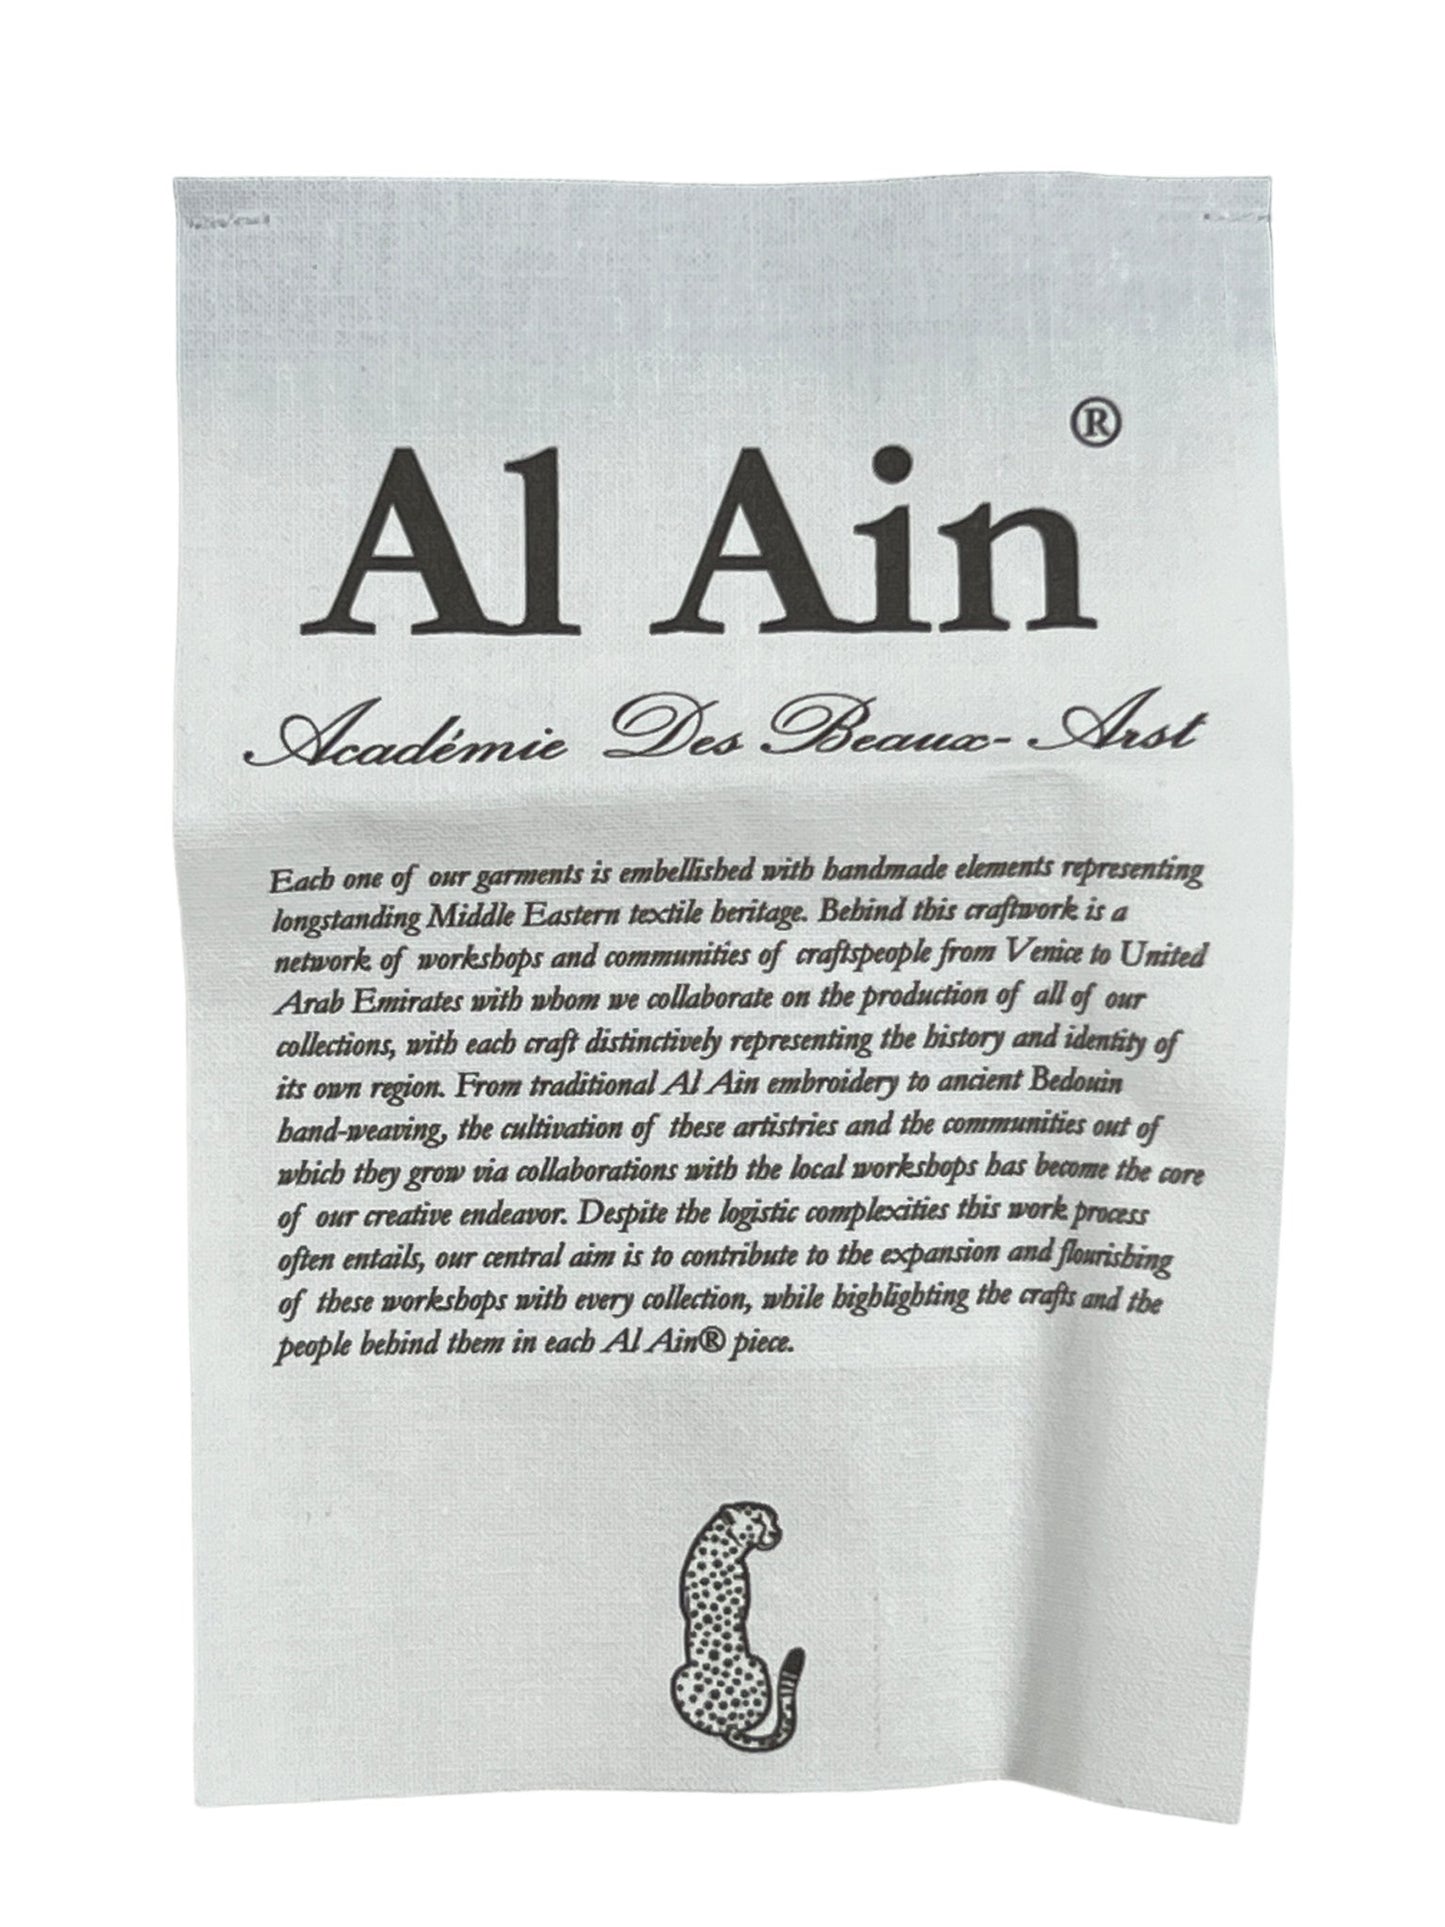 Fabric tag for the AL AIN AMHX S120 JABALIA NOIR graphic t-shirt, Made In Italy, with decorative snake illustration and embroidered AL AIN brand name. Includes descriptive text about the brand's philosophy and commitment to artistry.